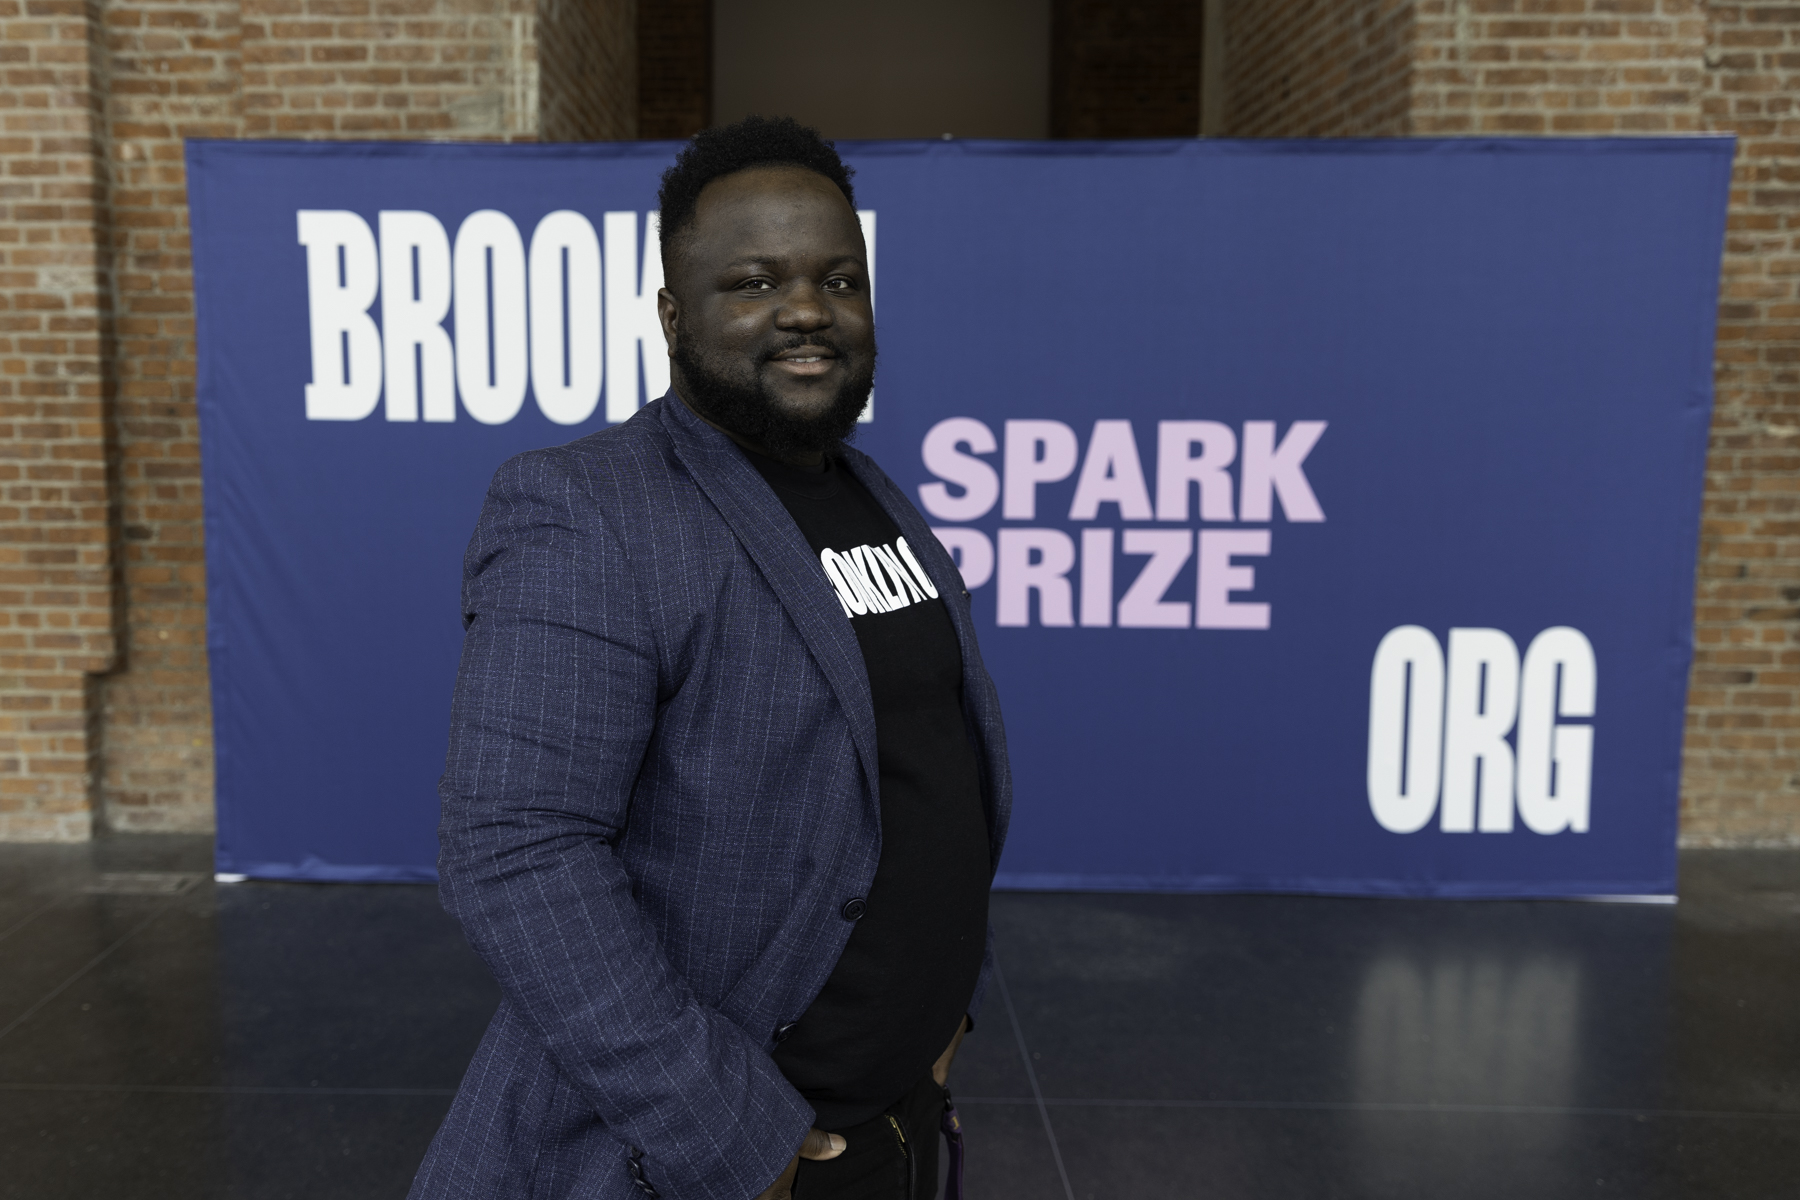 Man smiling in front of a banner reading "brooklyn spark prize.org.